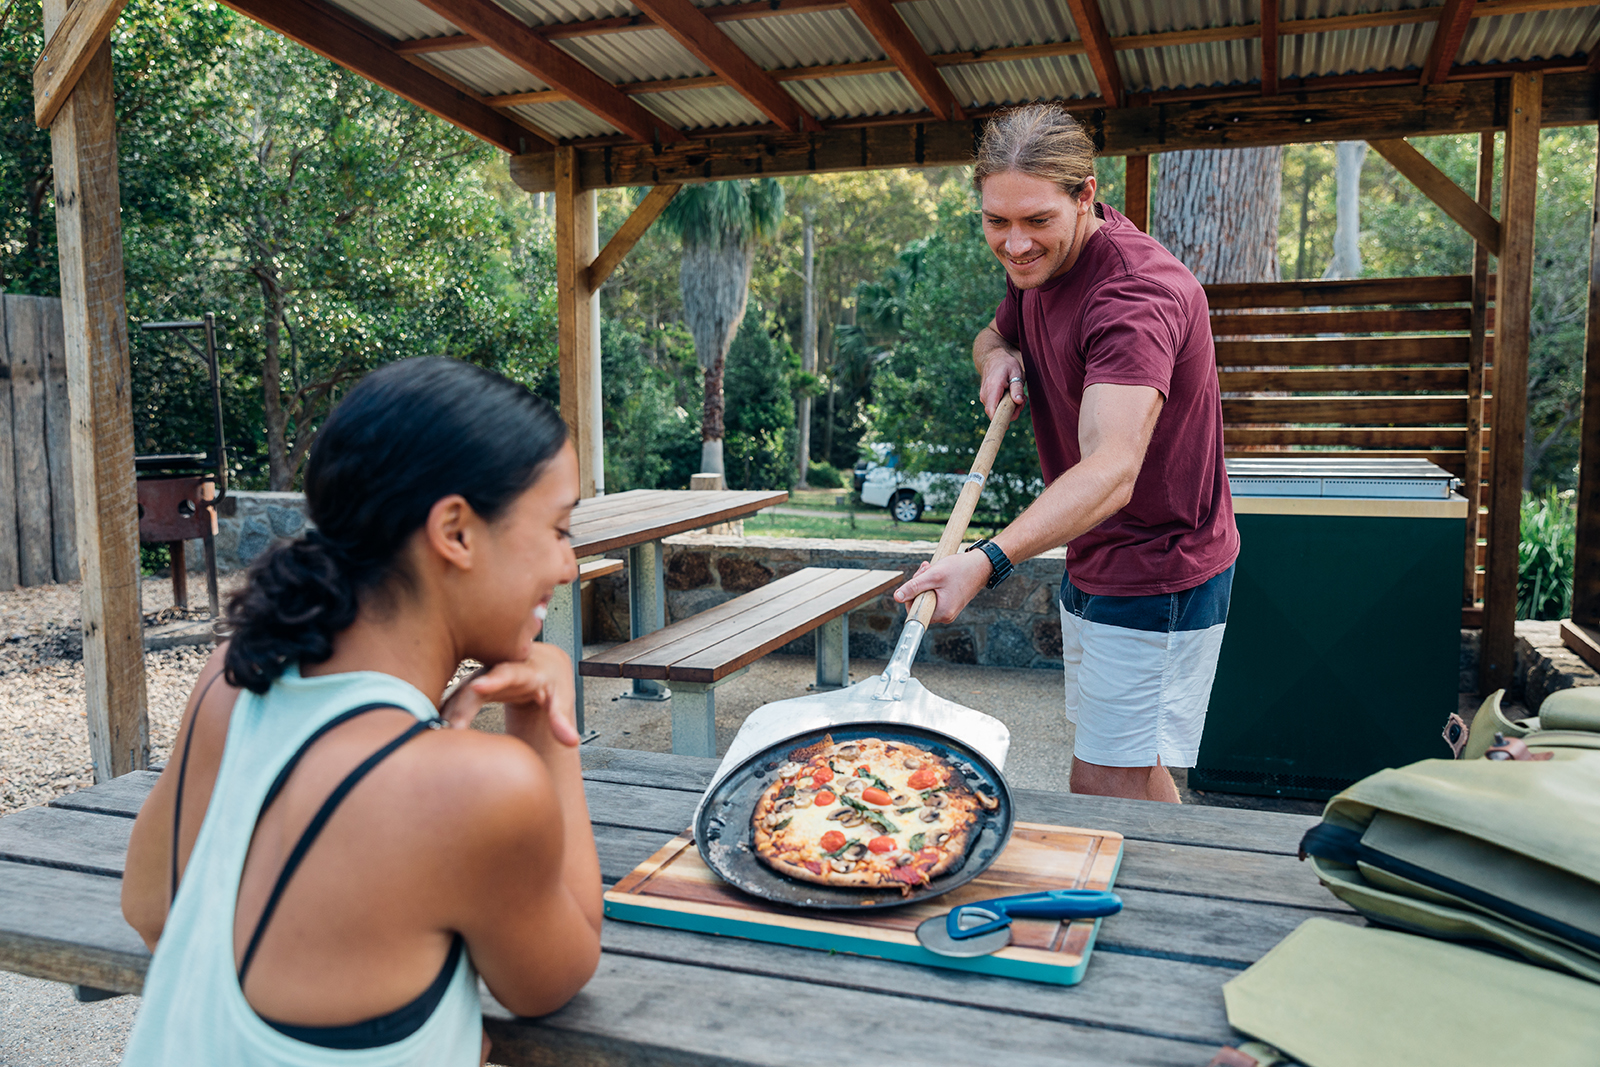 Two people enjoying woodfired pizza in Murramarang National Park. Photo credit: Melissa Findley/DPIE